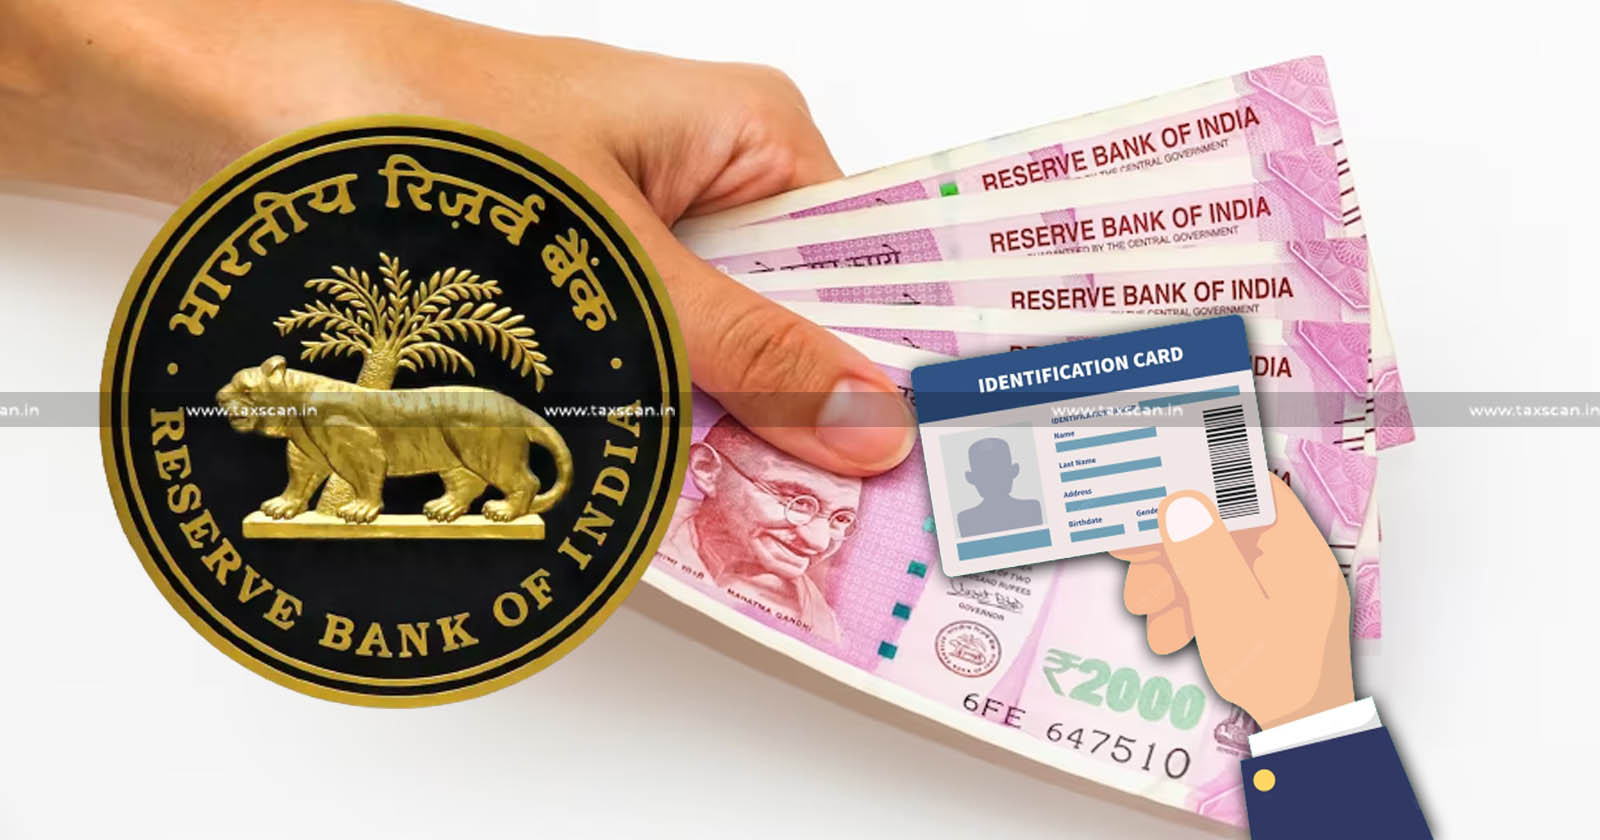 RBI Issues Exchange or Deposit Slip Format of Rs. 2000 notes - RBI Issues Exchange or Deposit of Rs. 2000 notes - RBI - Exchange or Deposit of Rs. 2000 notes - Format of Rs. 2000 notes without ID Proof - ID Proof - taxscan